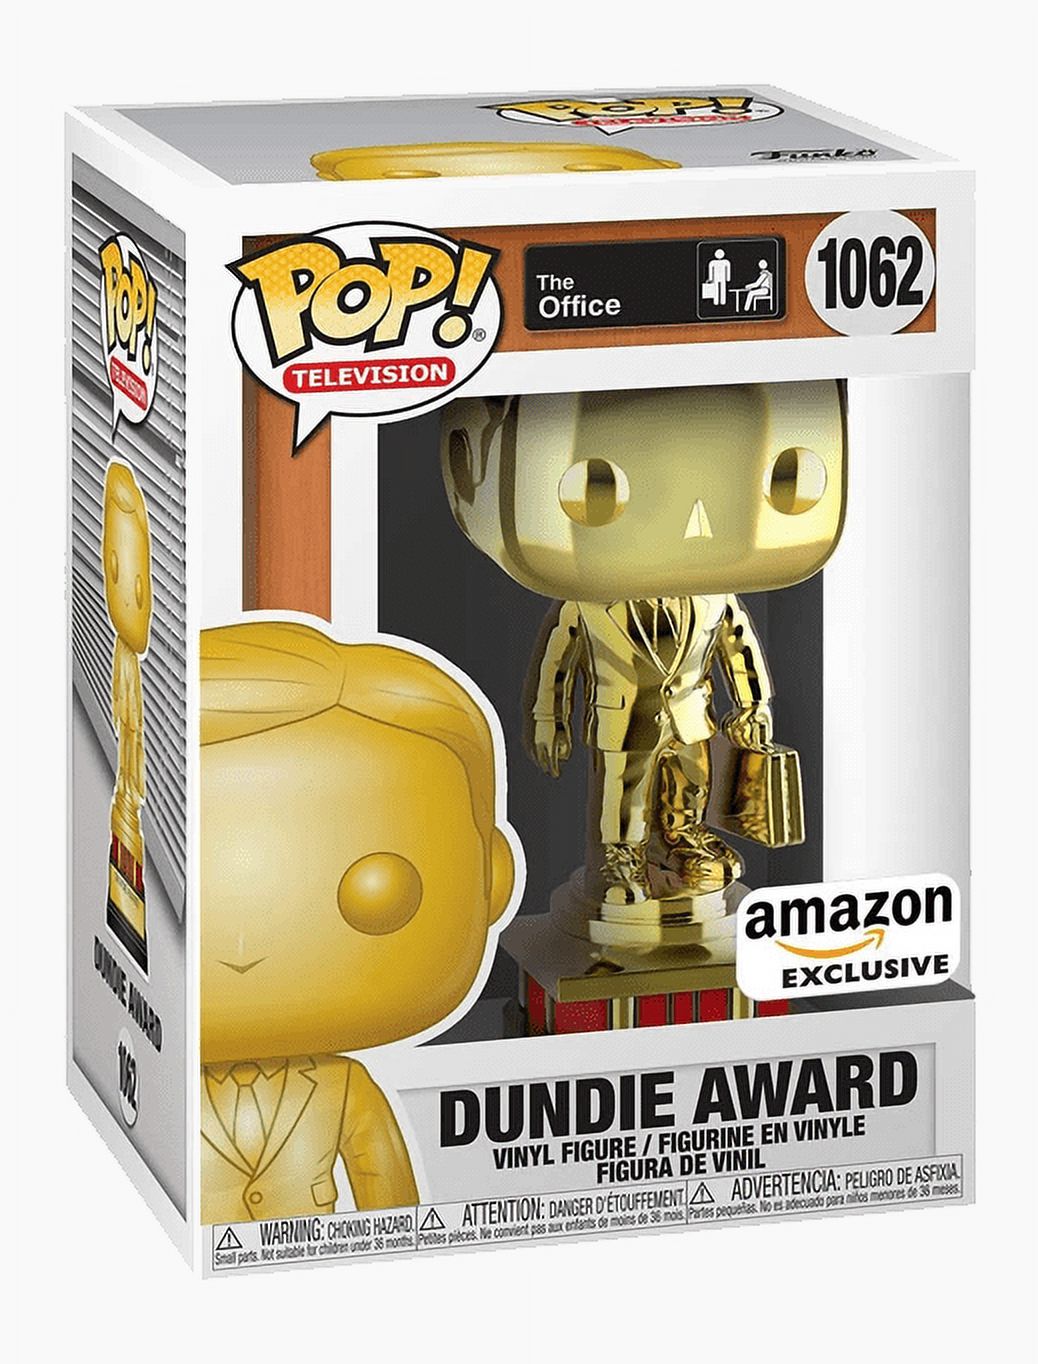 Funko Pop! The Office: THE OFFICE DUNDIE AWARD #1062 GOLD Chrome Exclusive + Protector - image 2 of 2